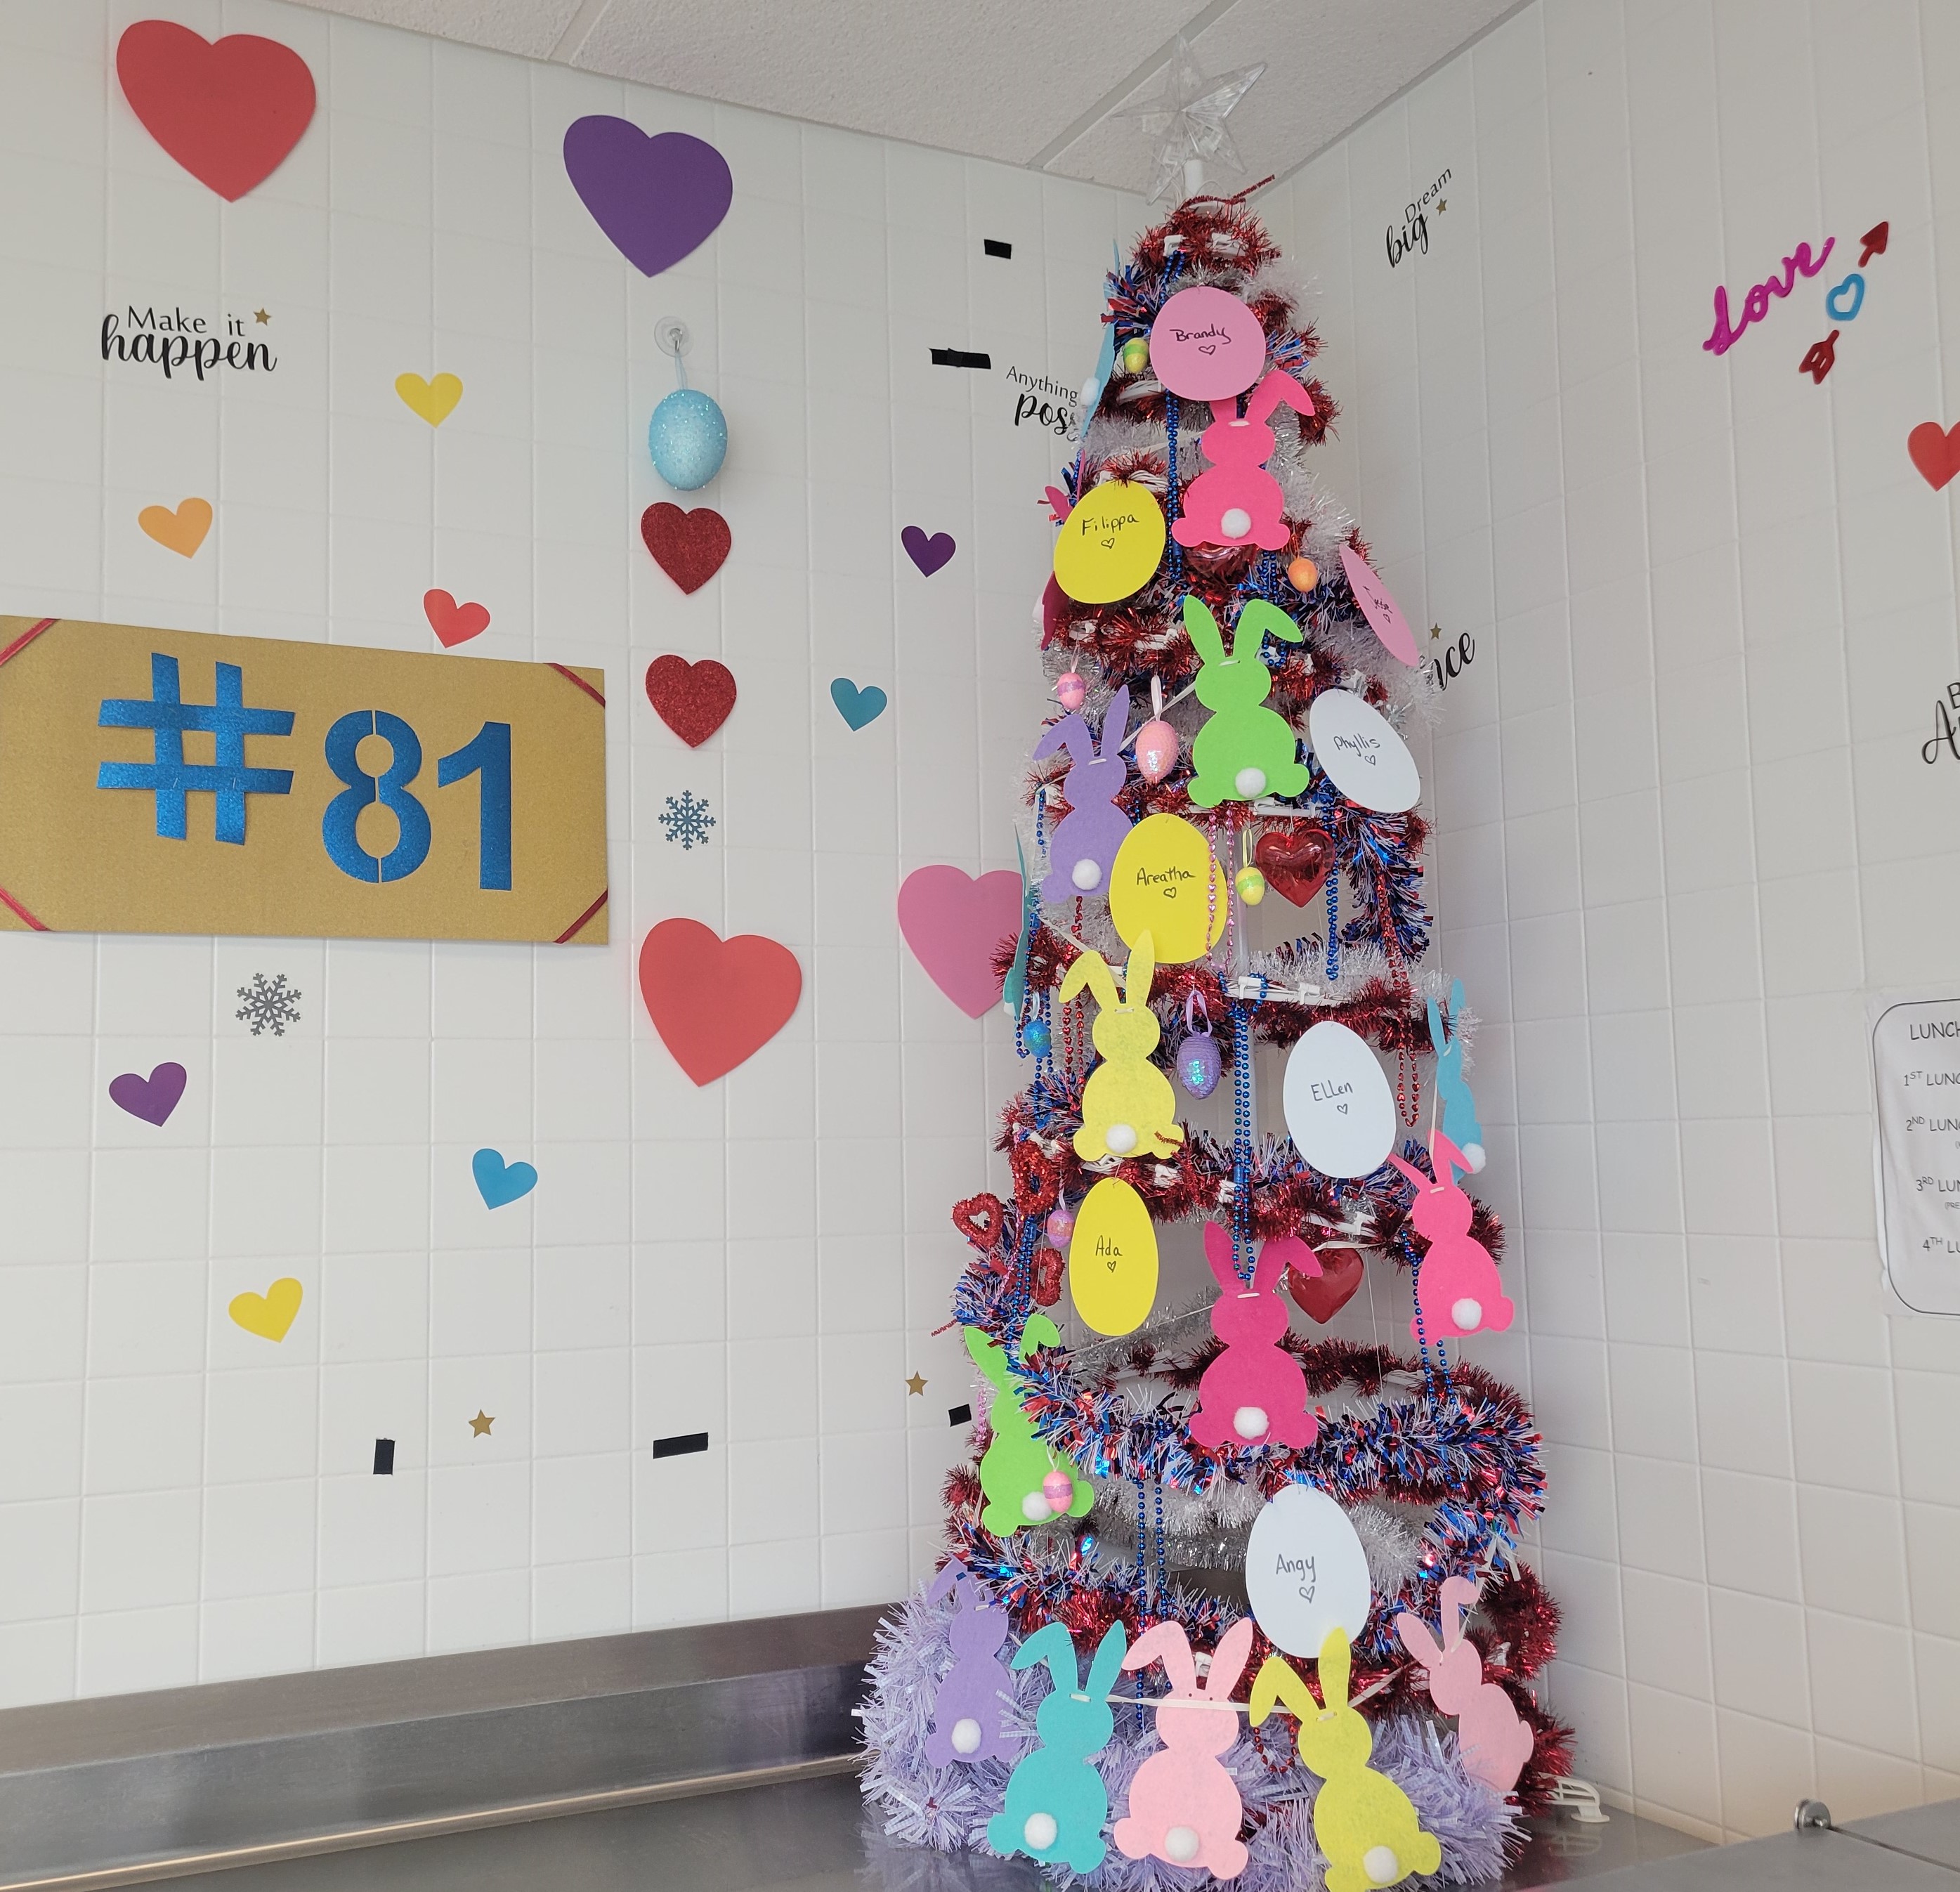 School 81 cafeteria decorated for Valentine's and Easter